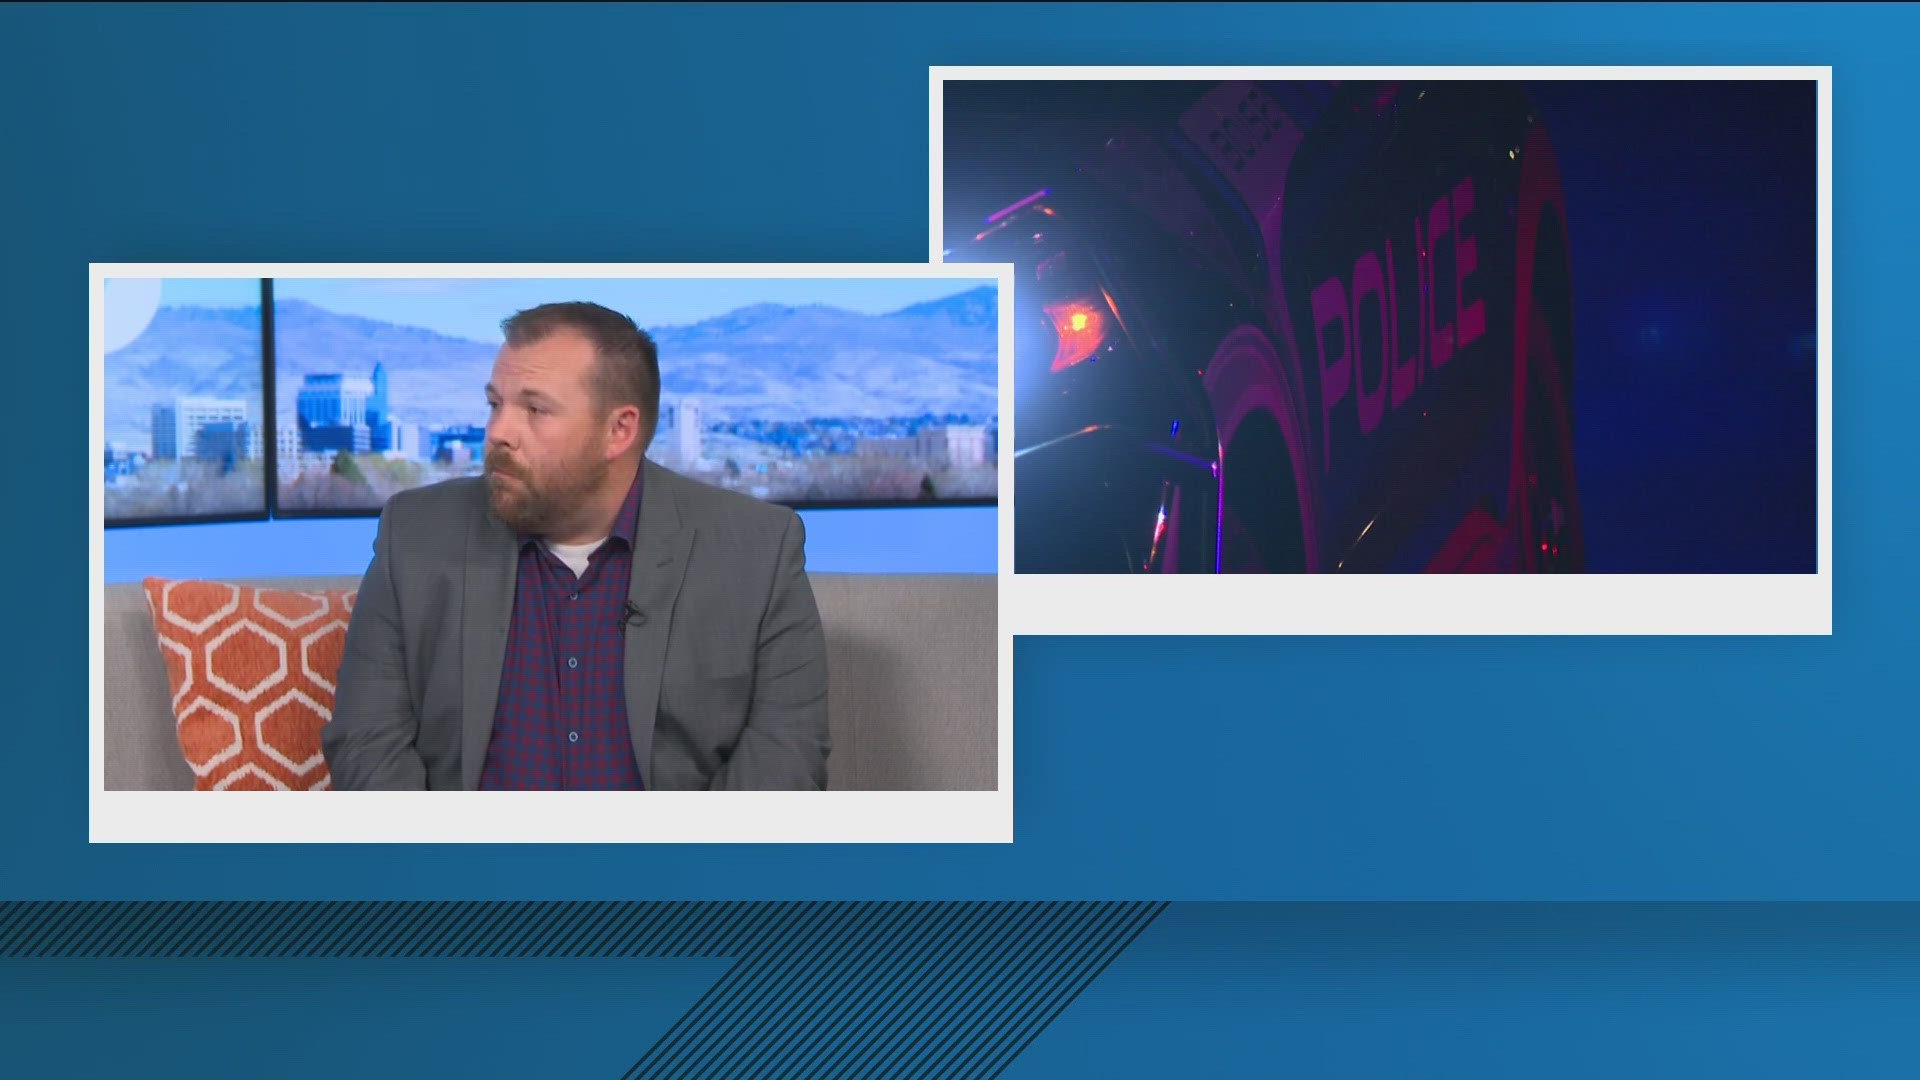 Detective Nick Peterson with the Boise Police Department's Special Victims Unit discusses sexual abuse prevention, steps to help, available resources and more.